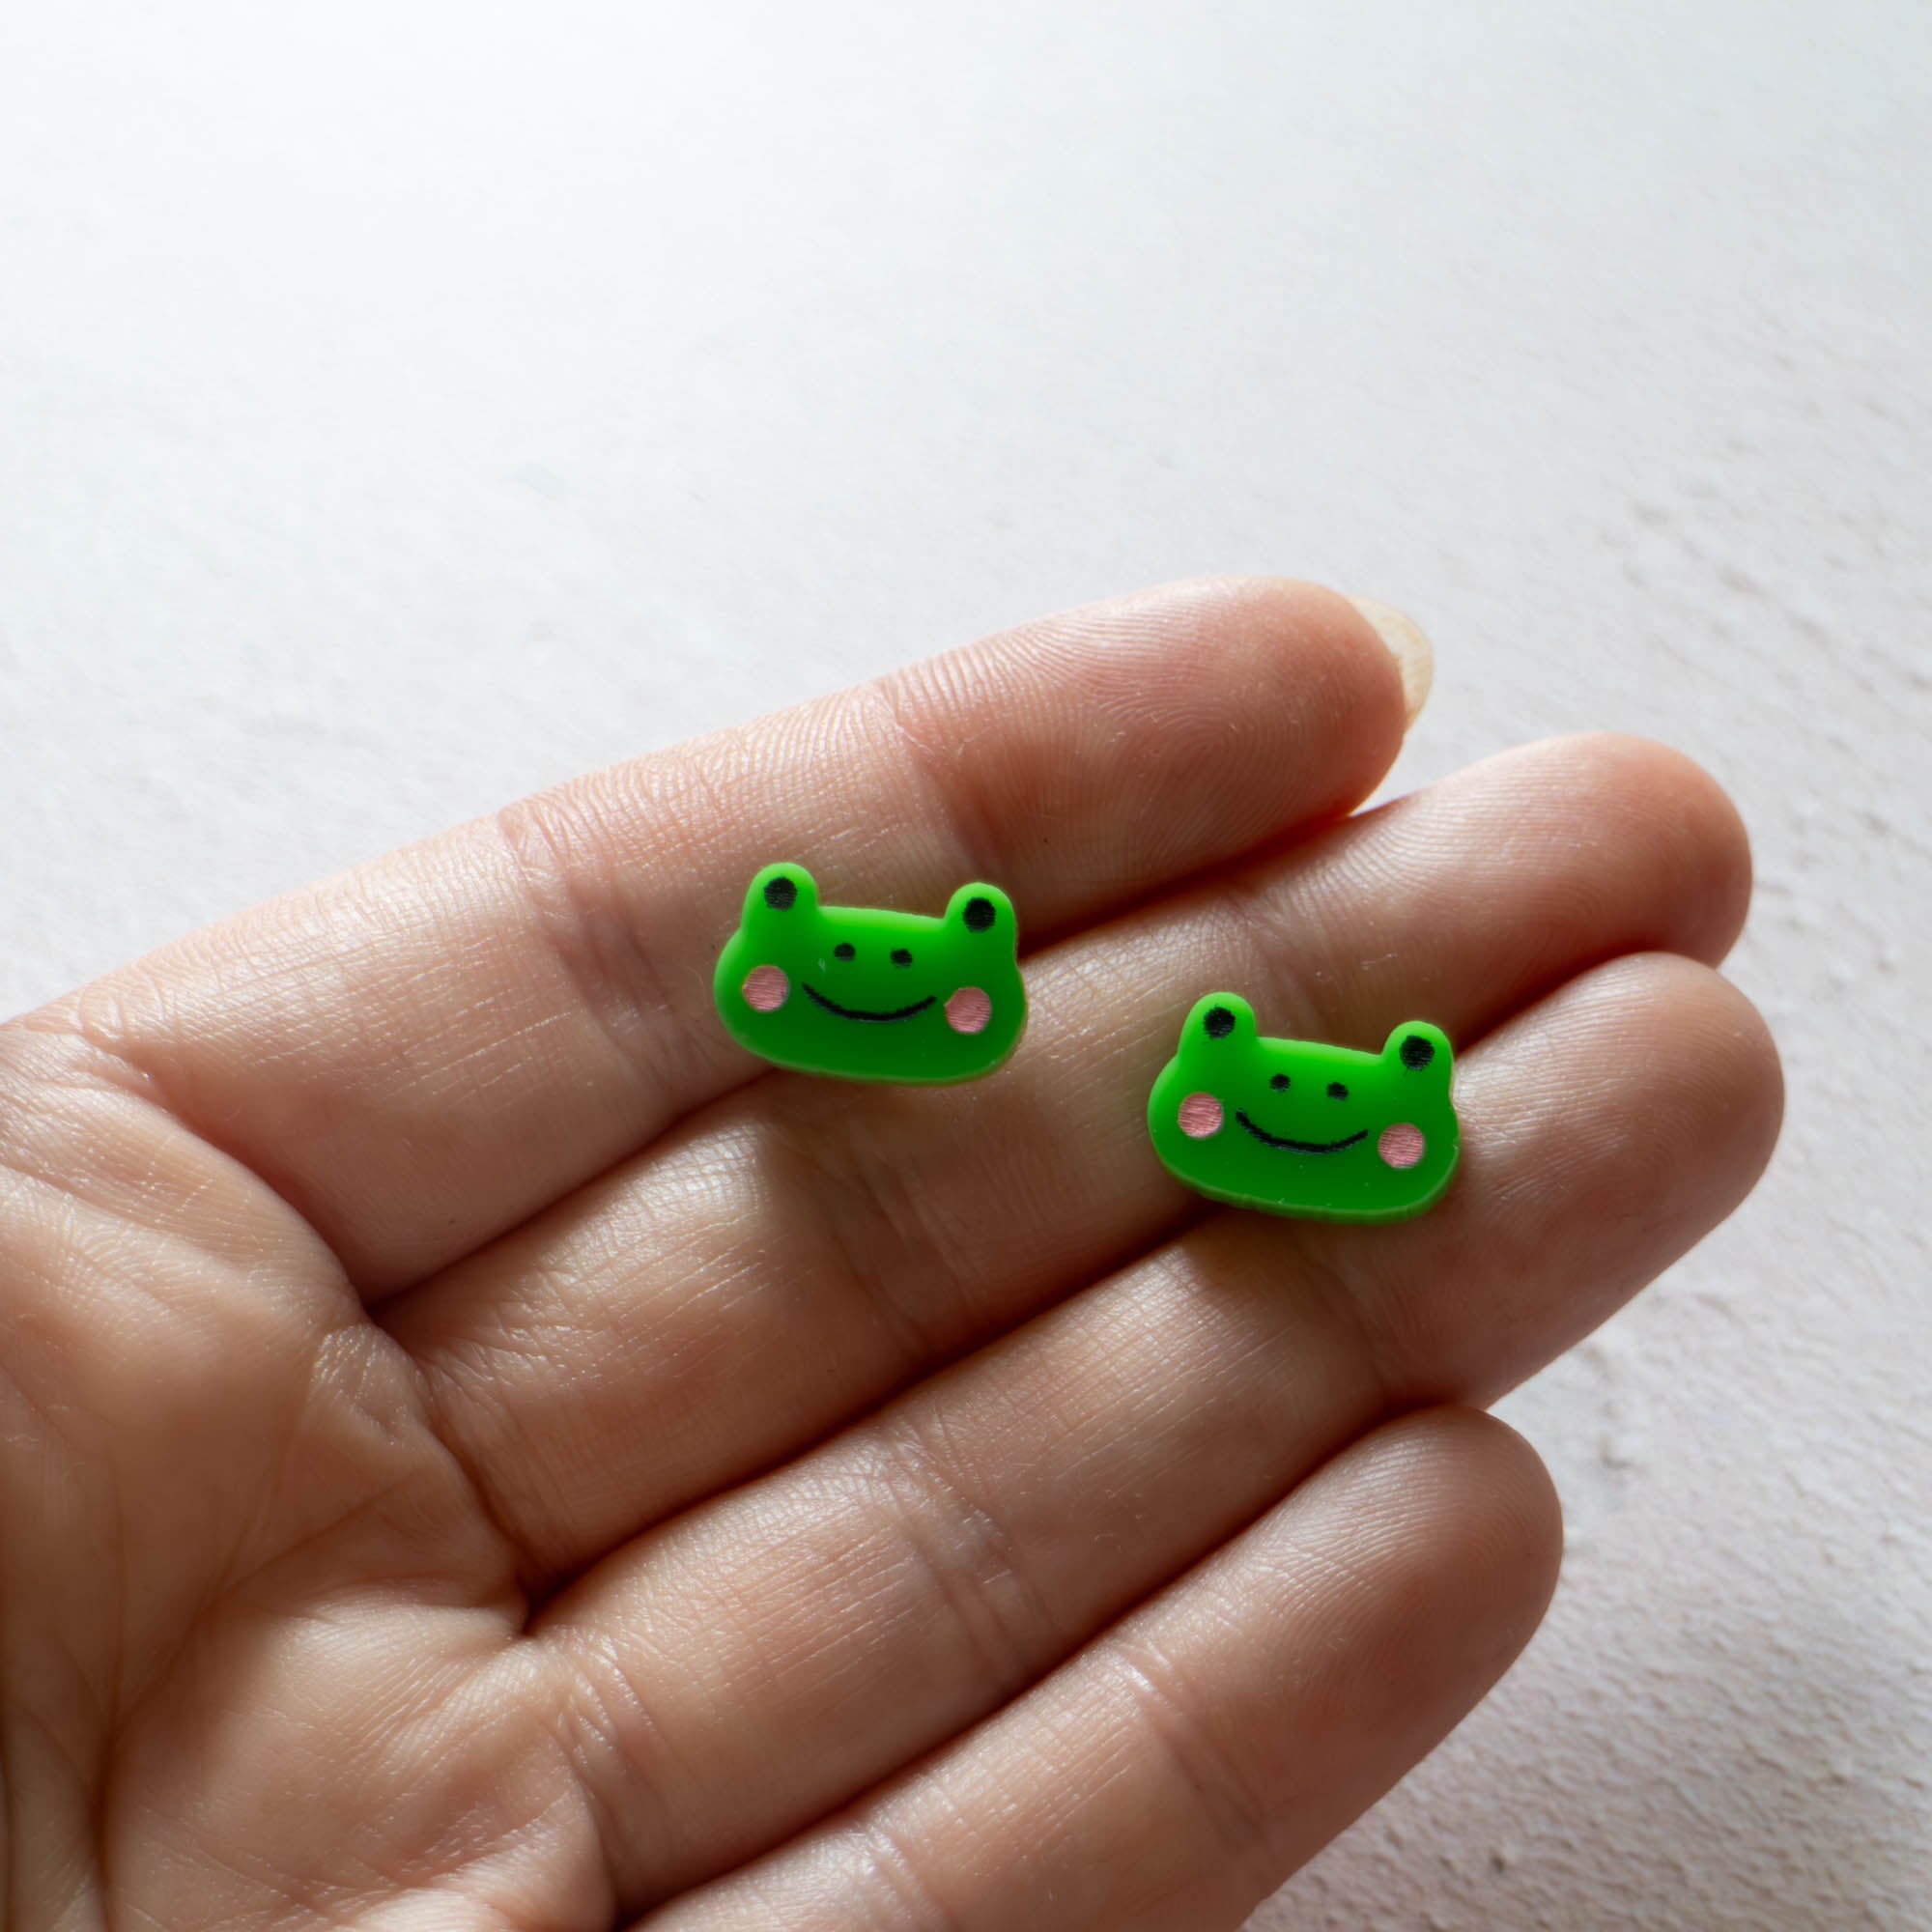 green frog face earrings with rosy pink cheeks and smiling face